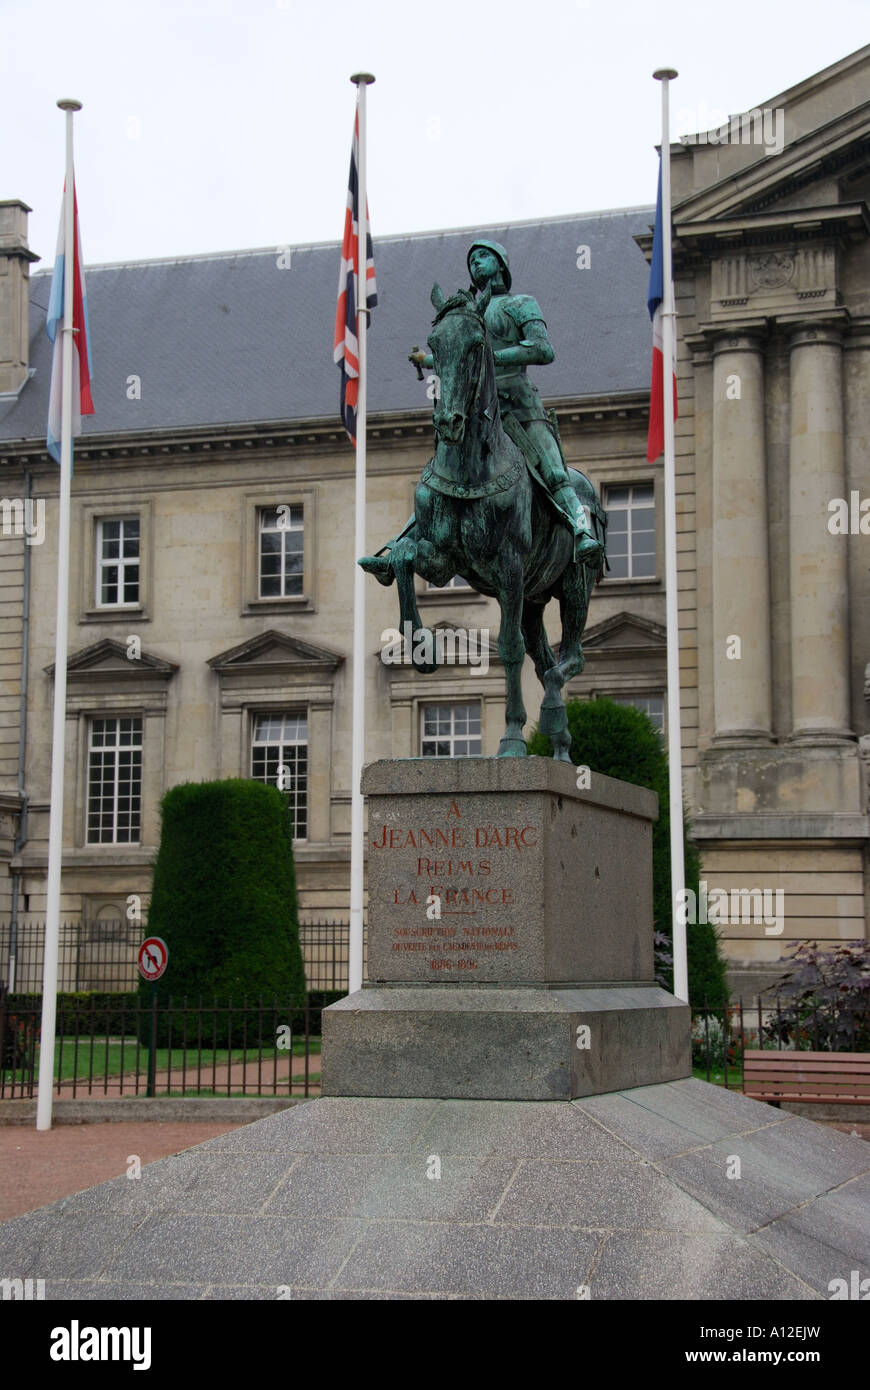 'Statue of 'Jeanne D'Arc' on a horse, '1412-1431', Reims, 'Champagne-Ardenne', France' Stock Photo